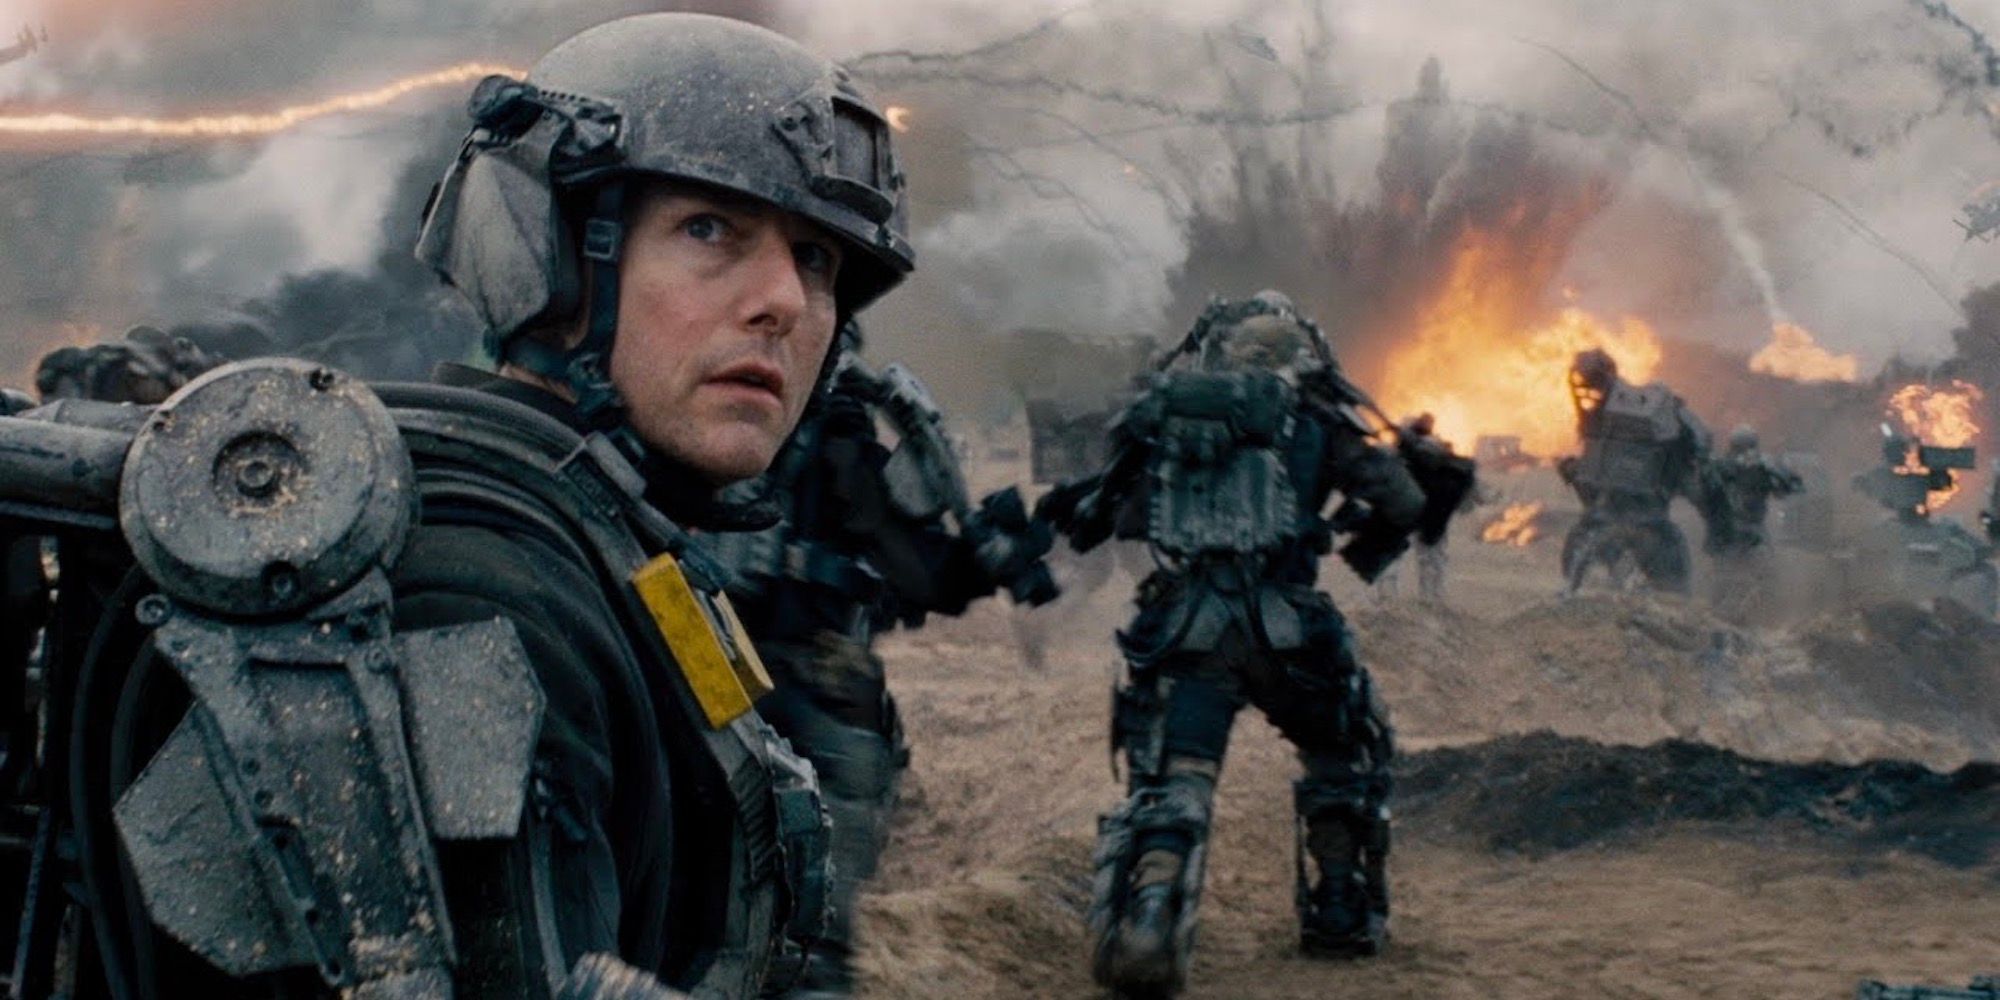 Tom Cruise looking back on a battlefield in the Edge of Tomorrow trailer.